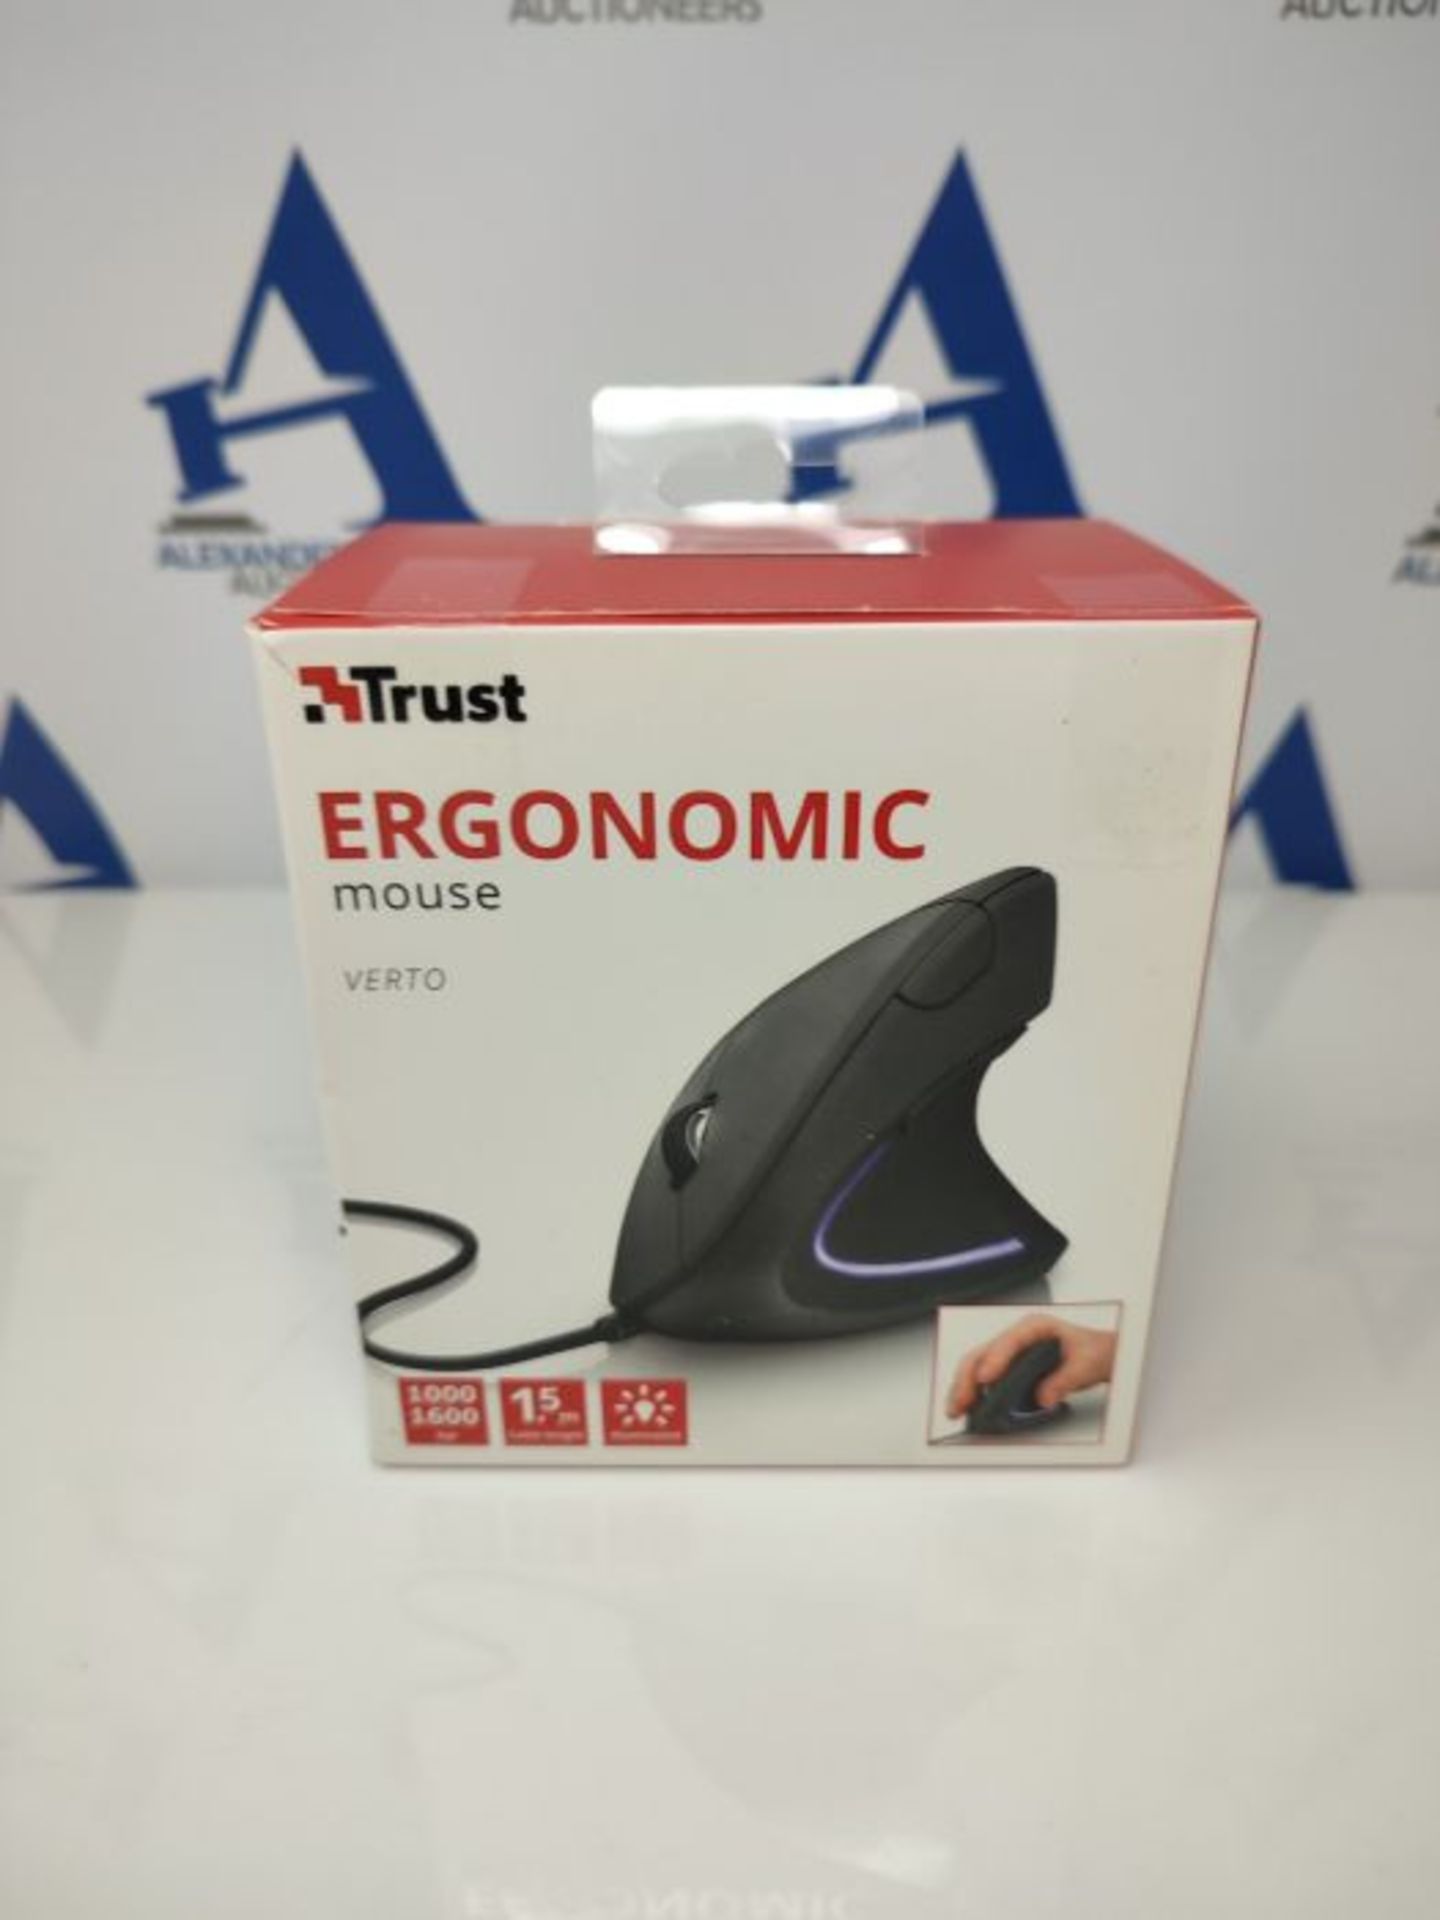 Trust Verto Wired Ergonomic Mouse, Vertical Mouse with LED Illumination, 1000-1600 DPI - Image 2 of 3